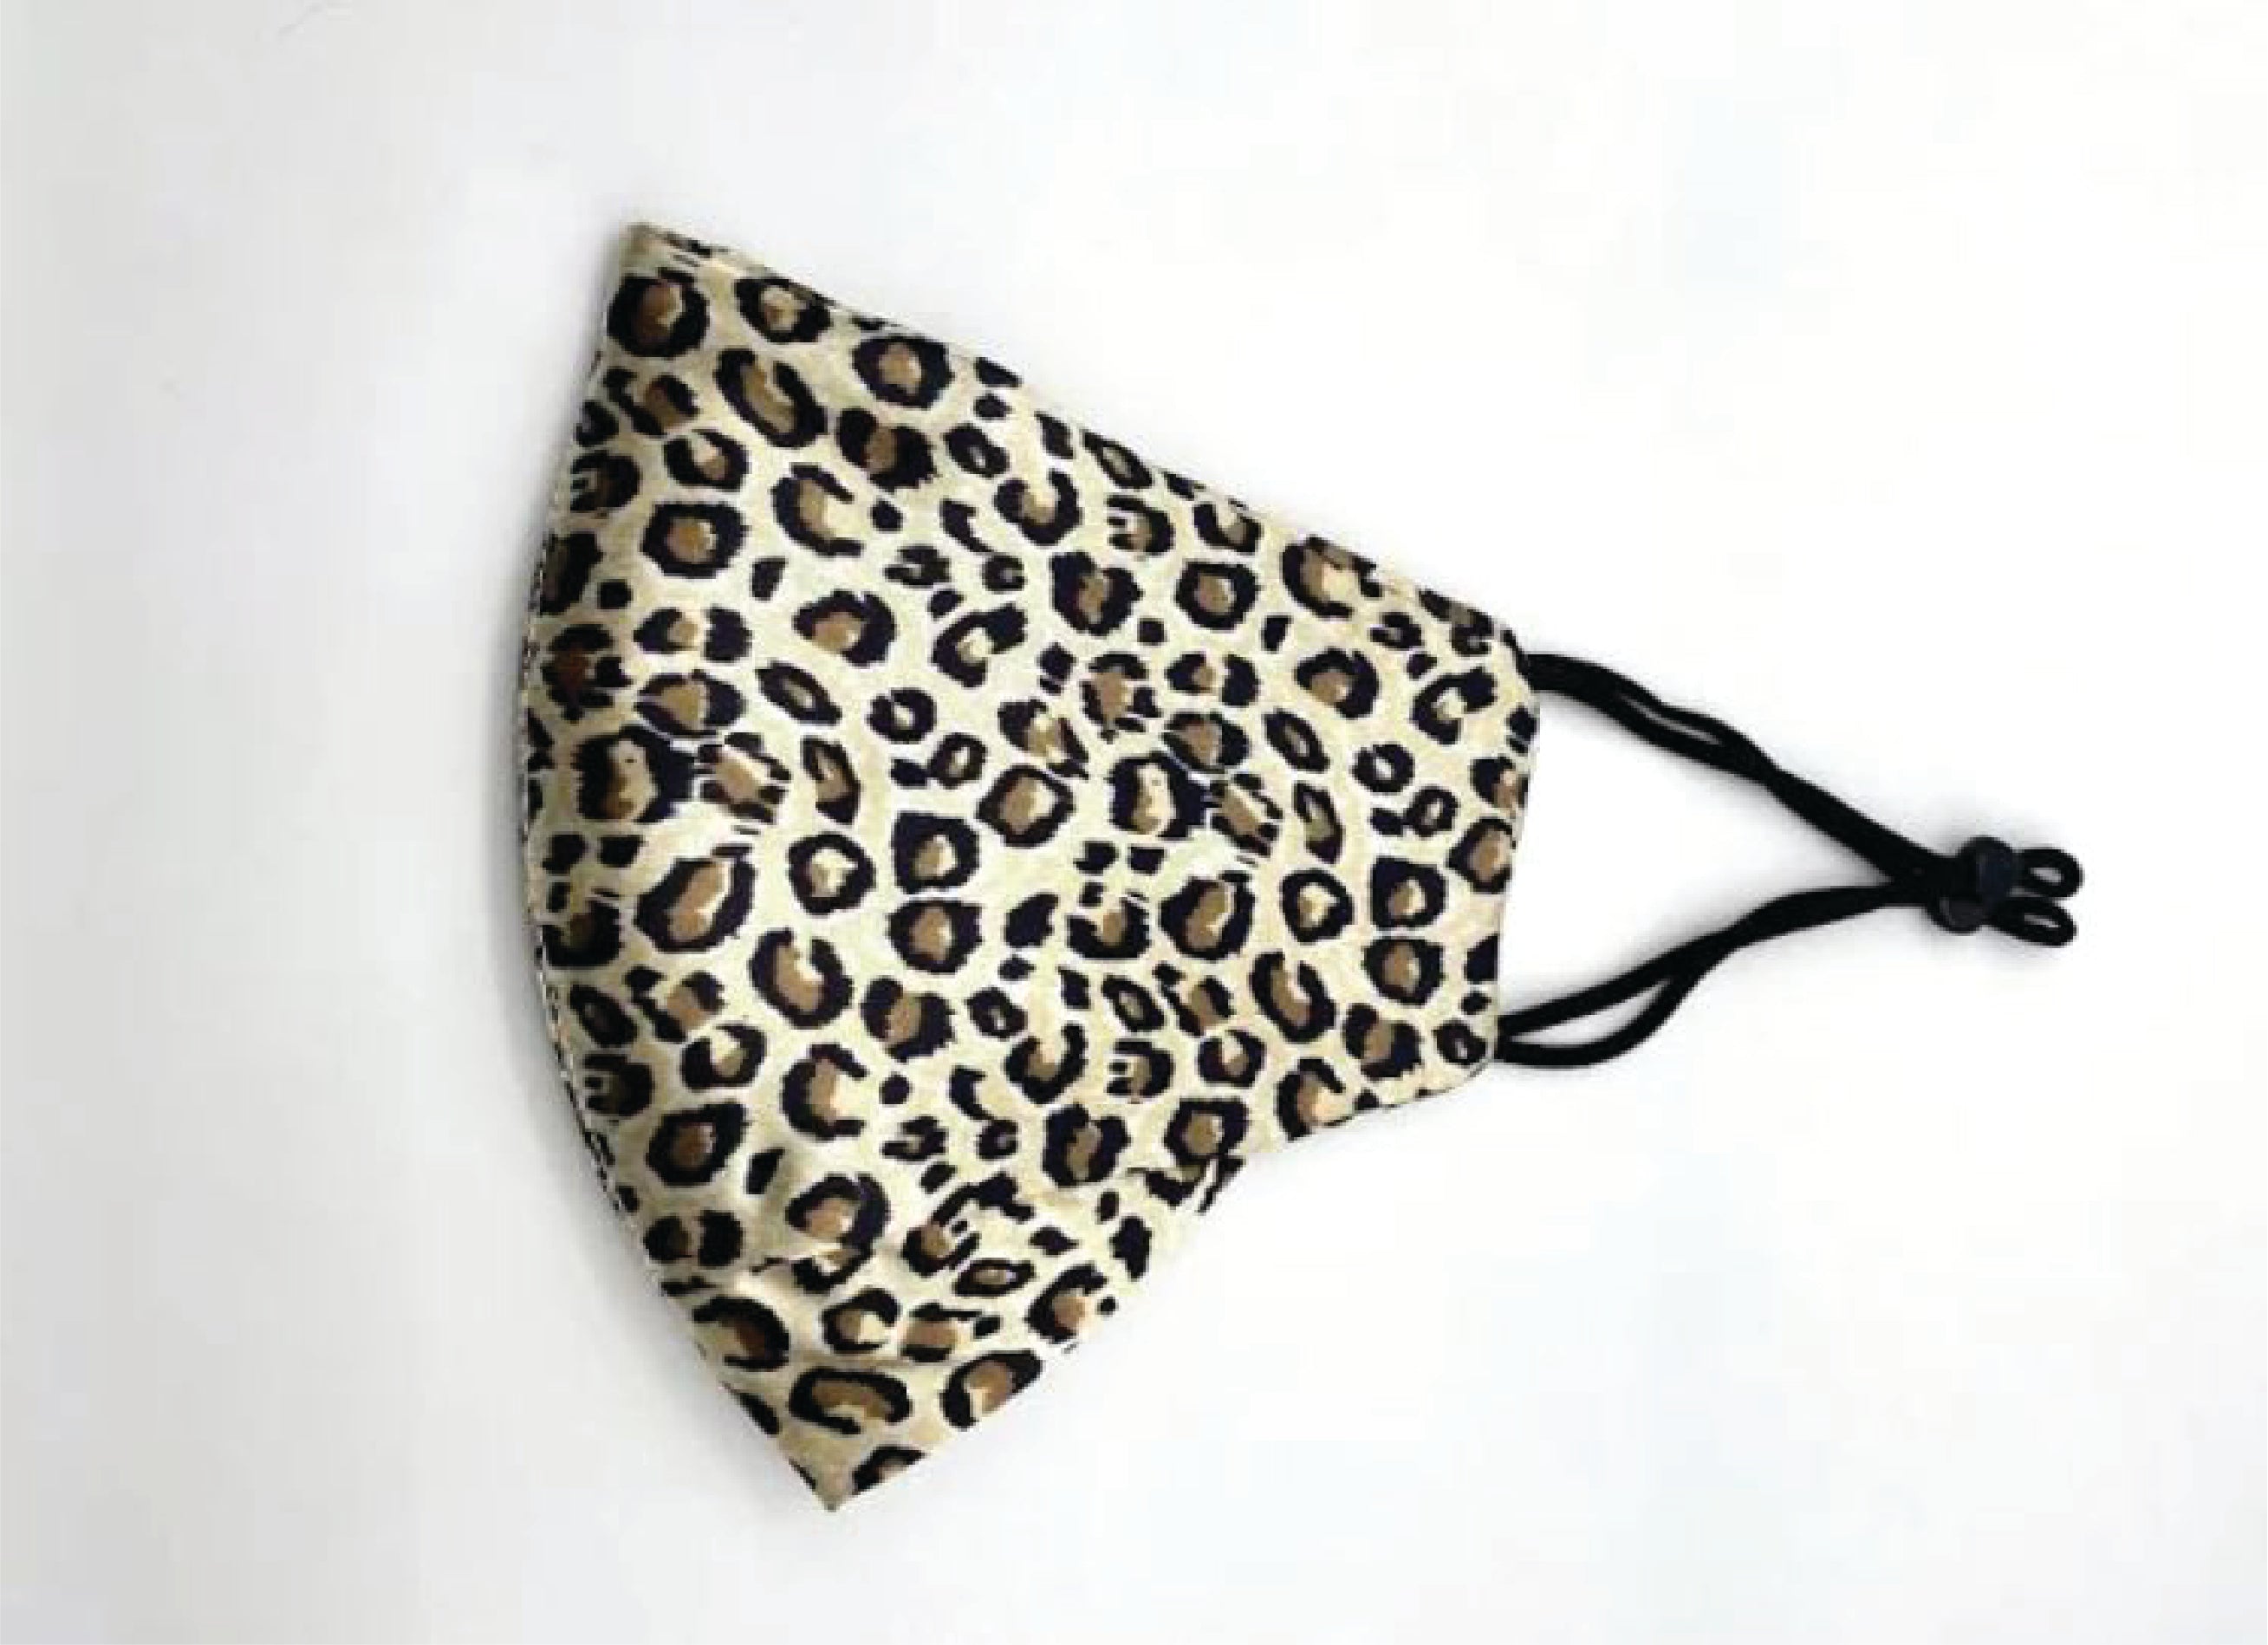 100% Silk Face Masks - USA Made - Adjustable Coverings - Leopard - pm 2.5 filter included